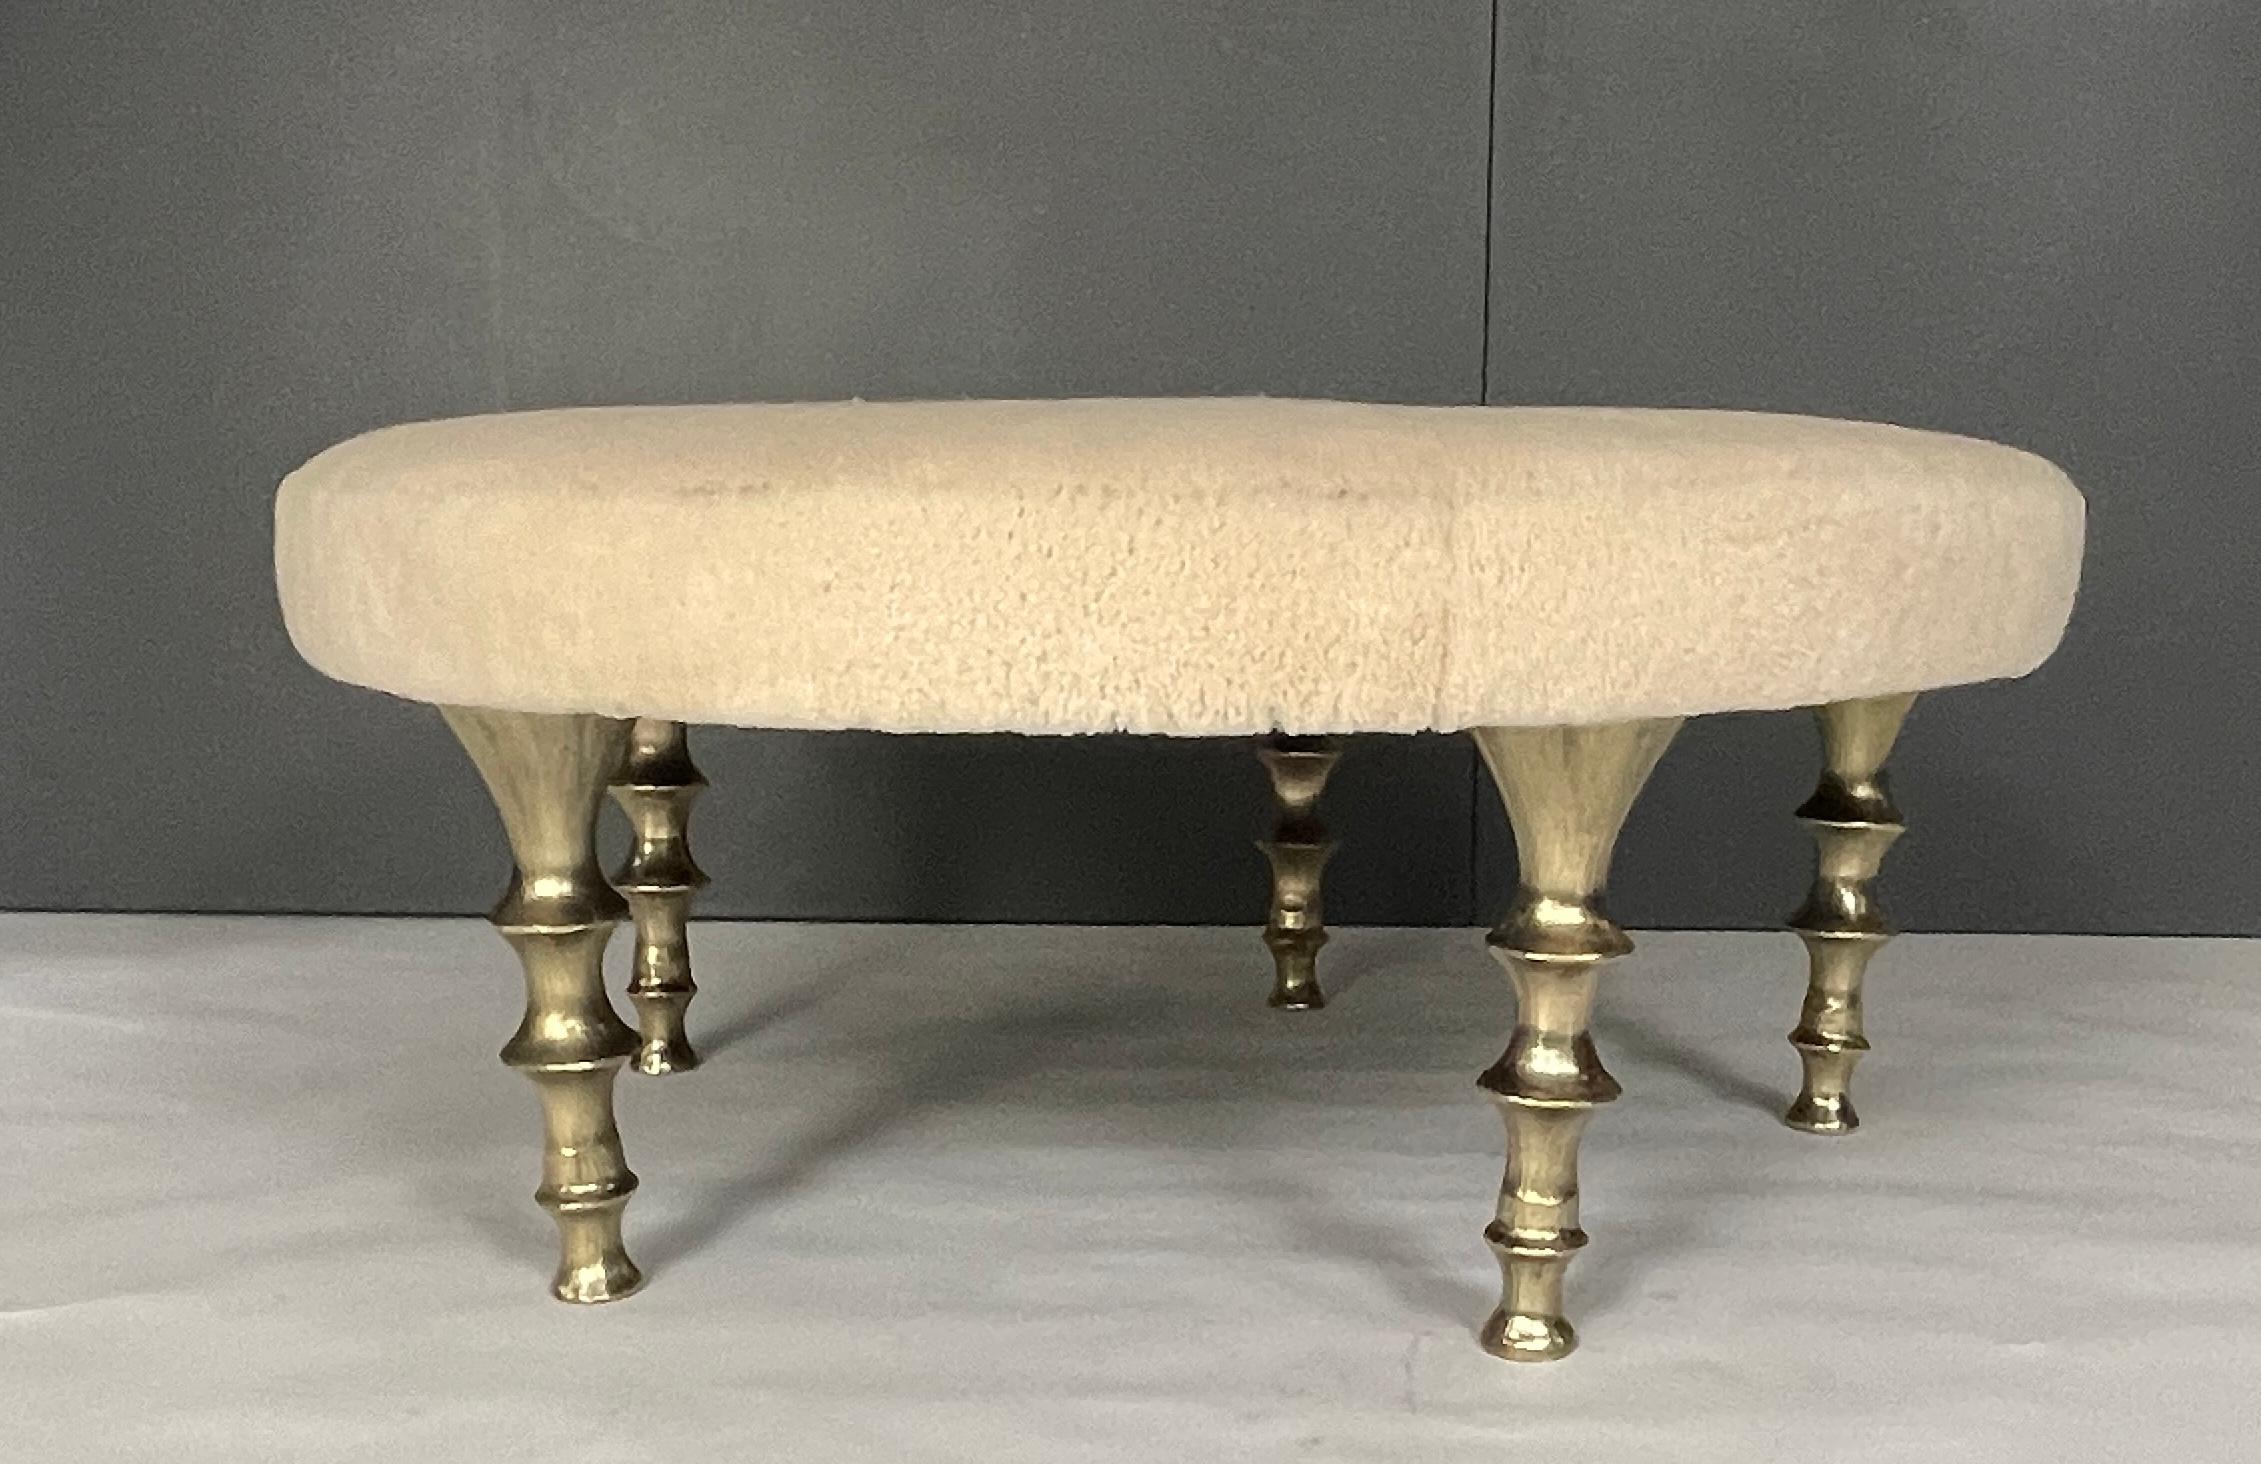 This round ottoman make a dramatic statement in your interior. It has five powerful cast gold bronze legs, shearling hide with an organic feel. The cushion can be made is various shapes, in your own fabric or hide. We can also create stools or